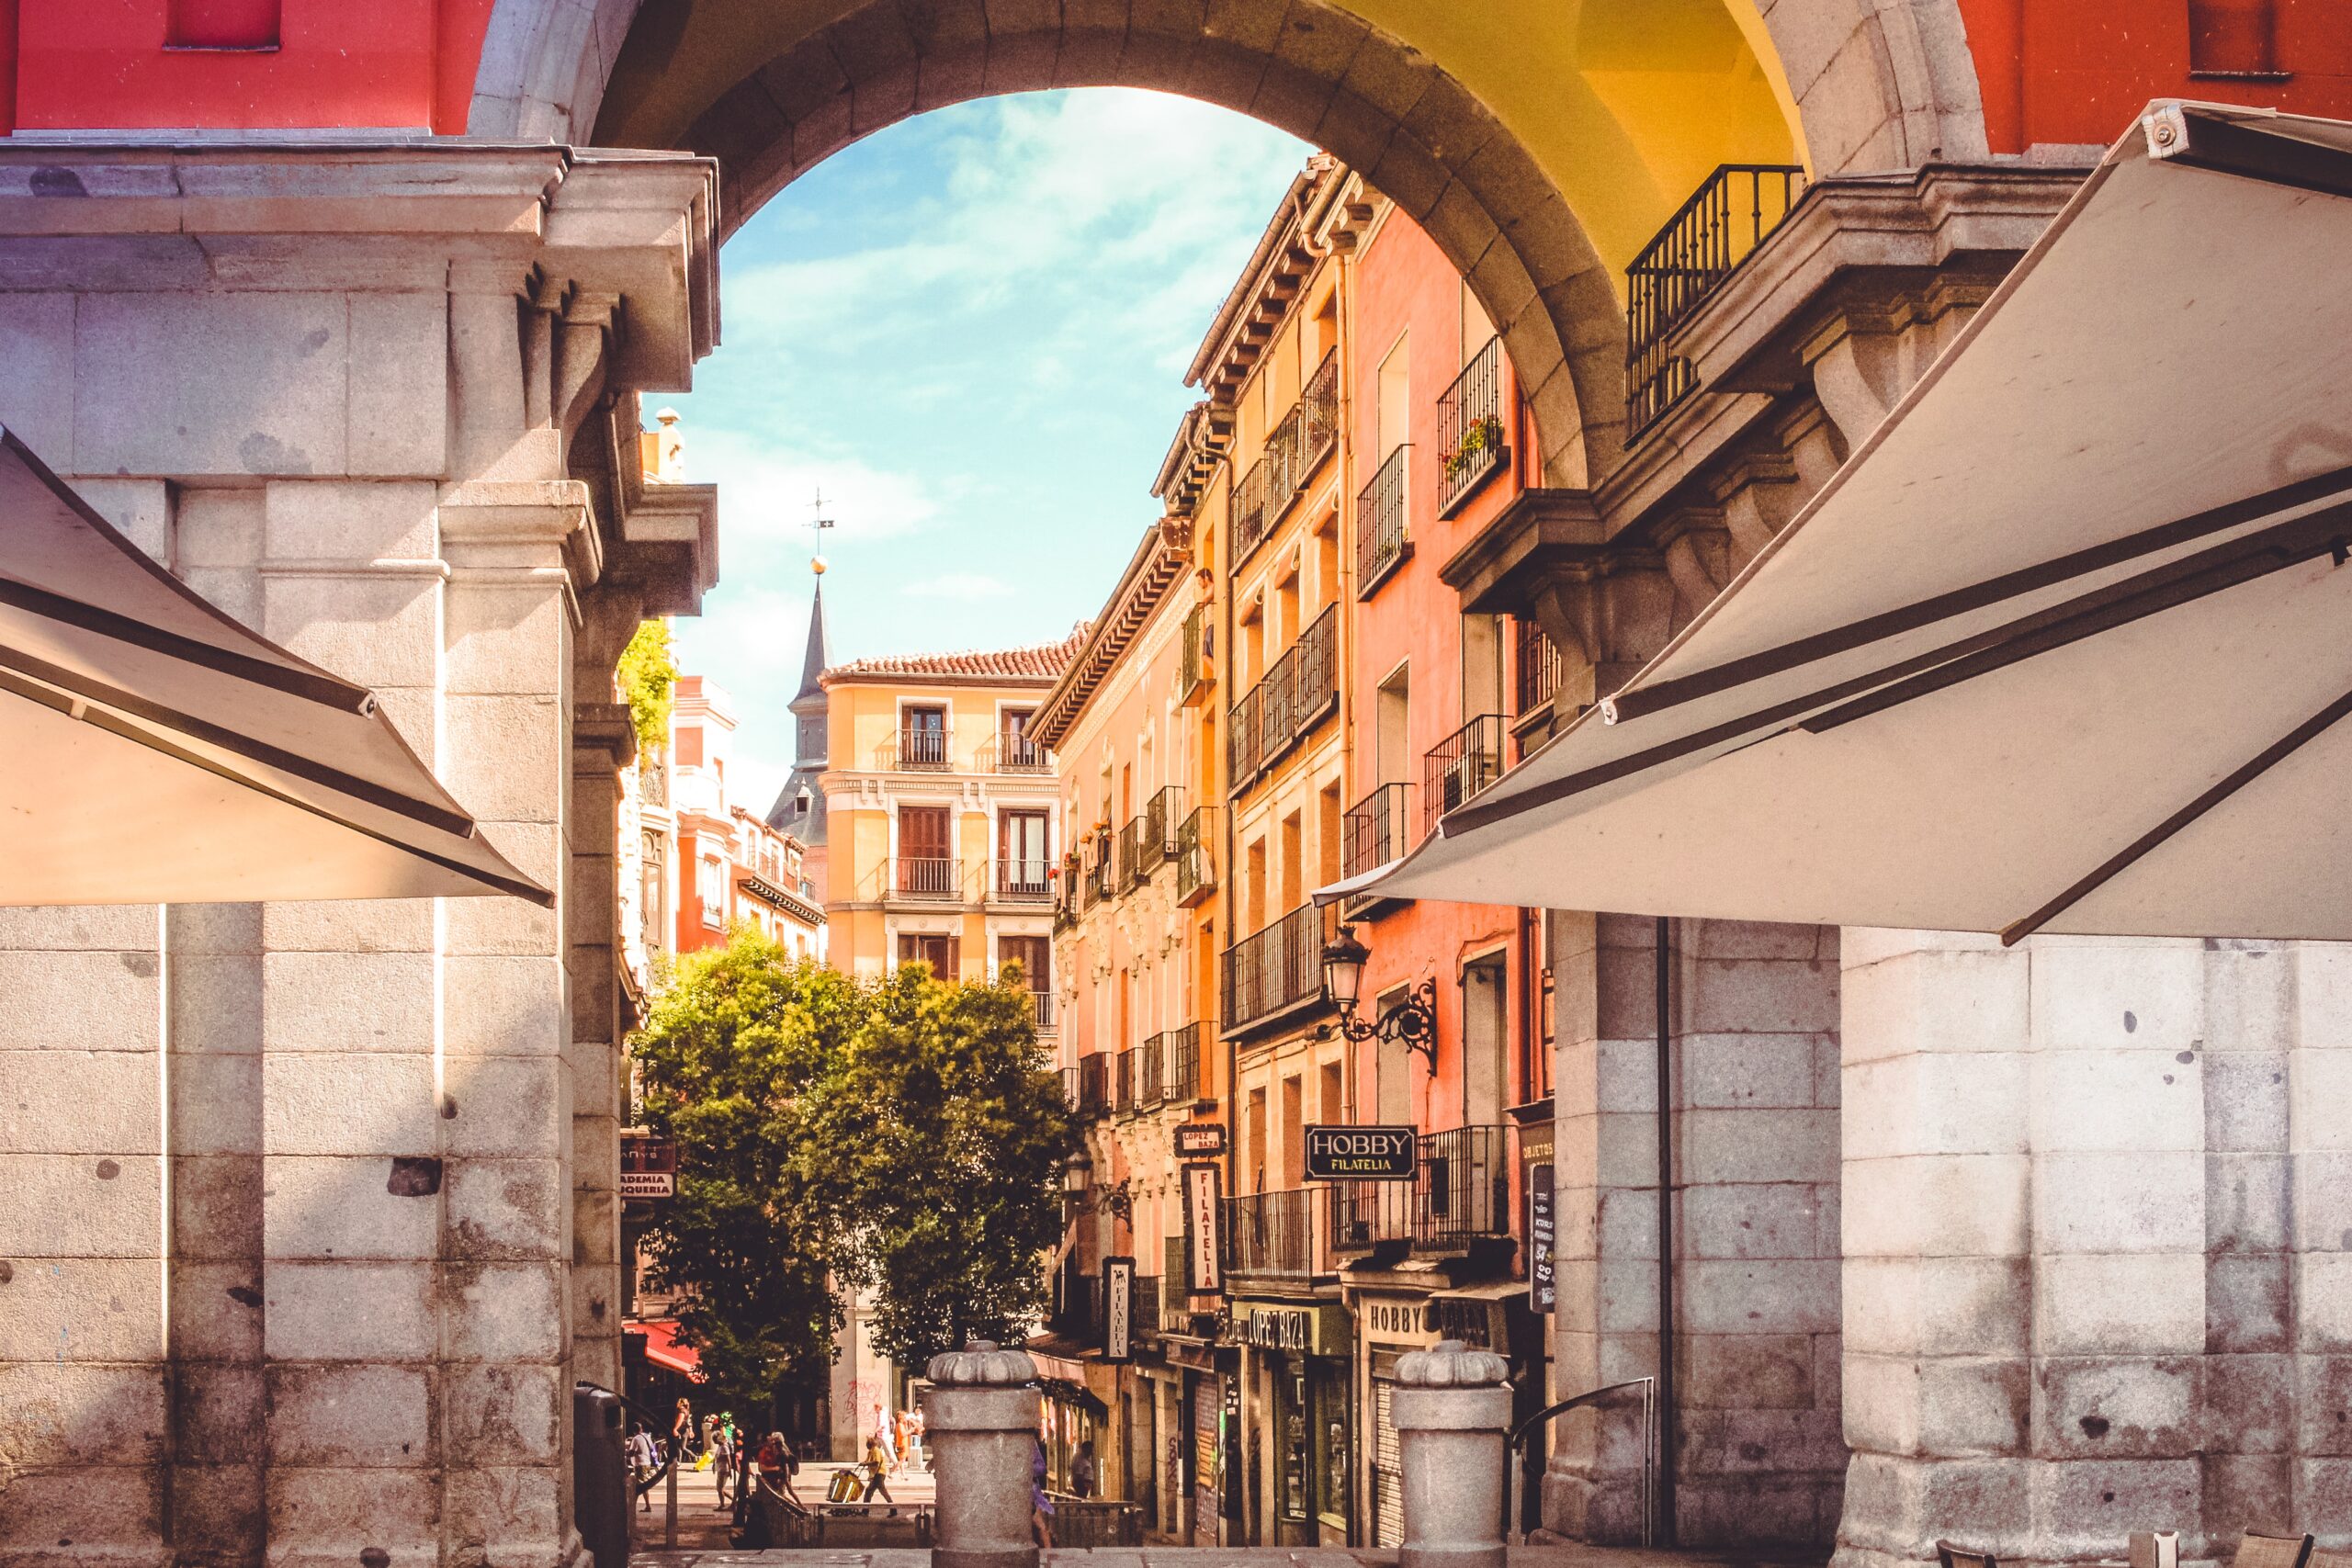 Cross-border Wills, Probate, Trusts and Tax, vital considerations for British Citizens living in Italy, Spain or Portugal